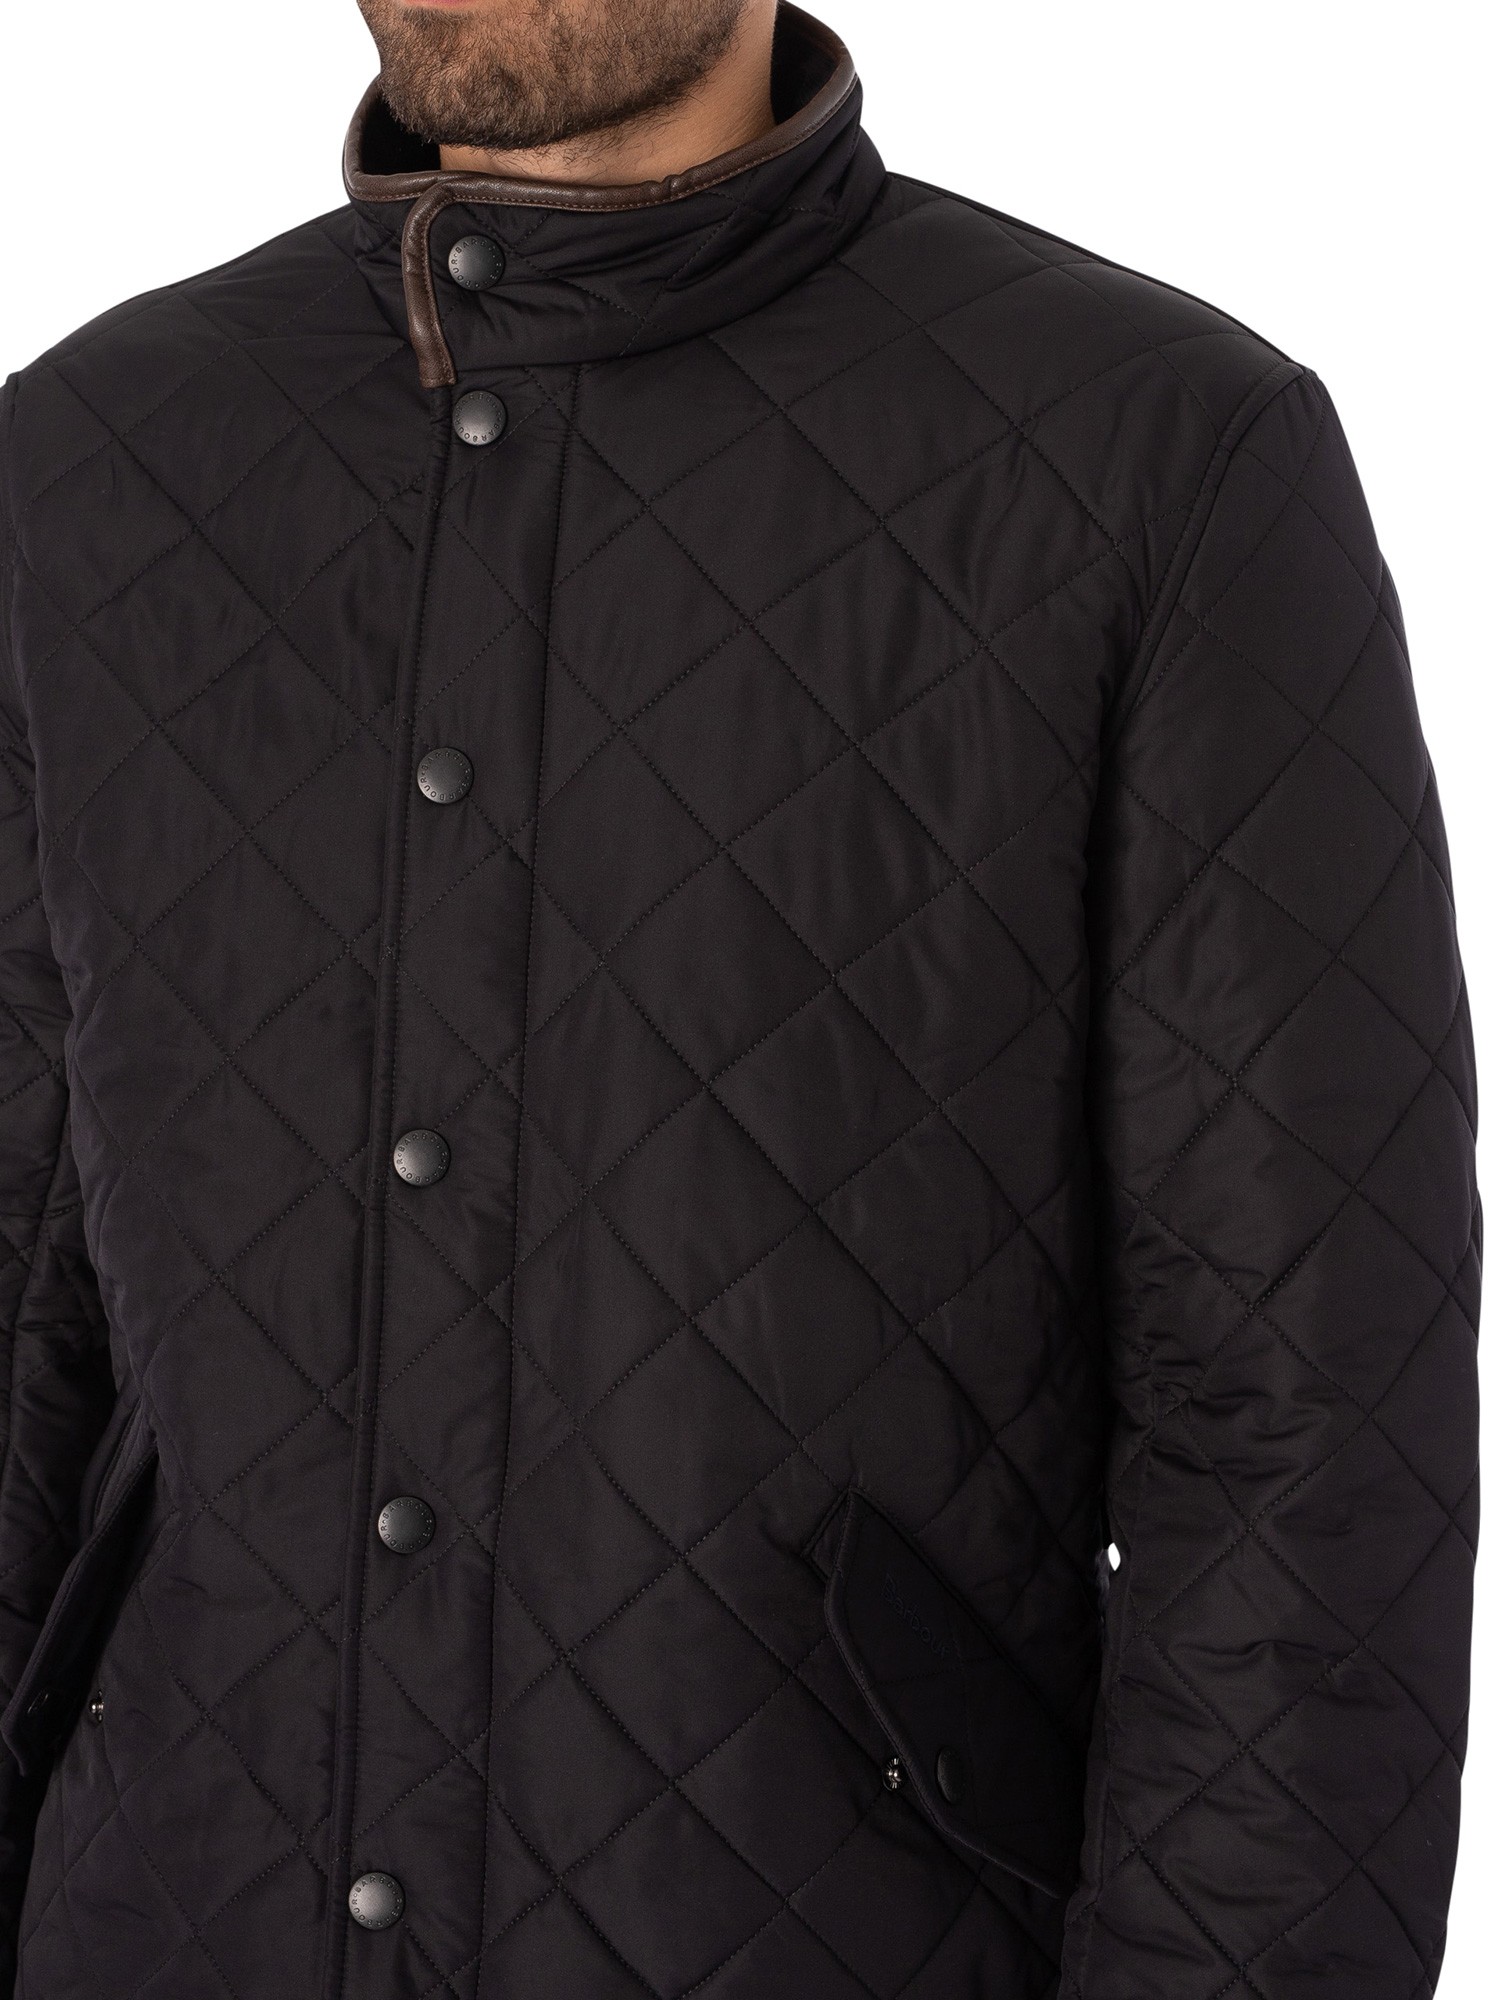 Barbour Powell Quilted Jacket - Navy | Standout